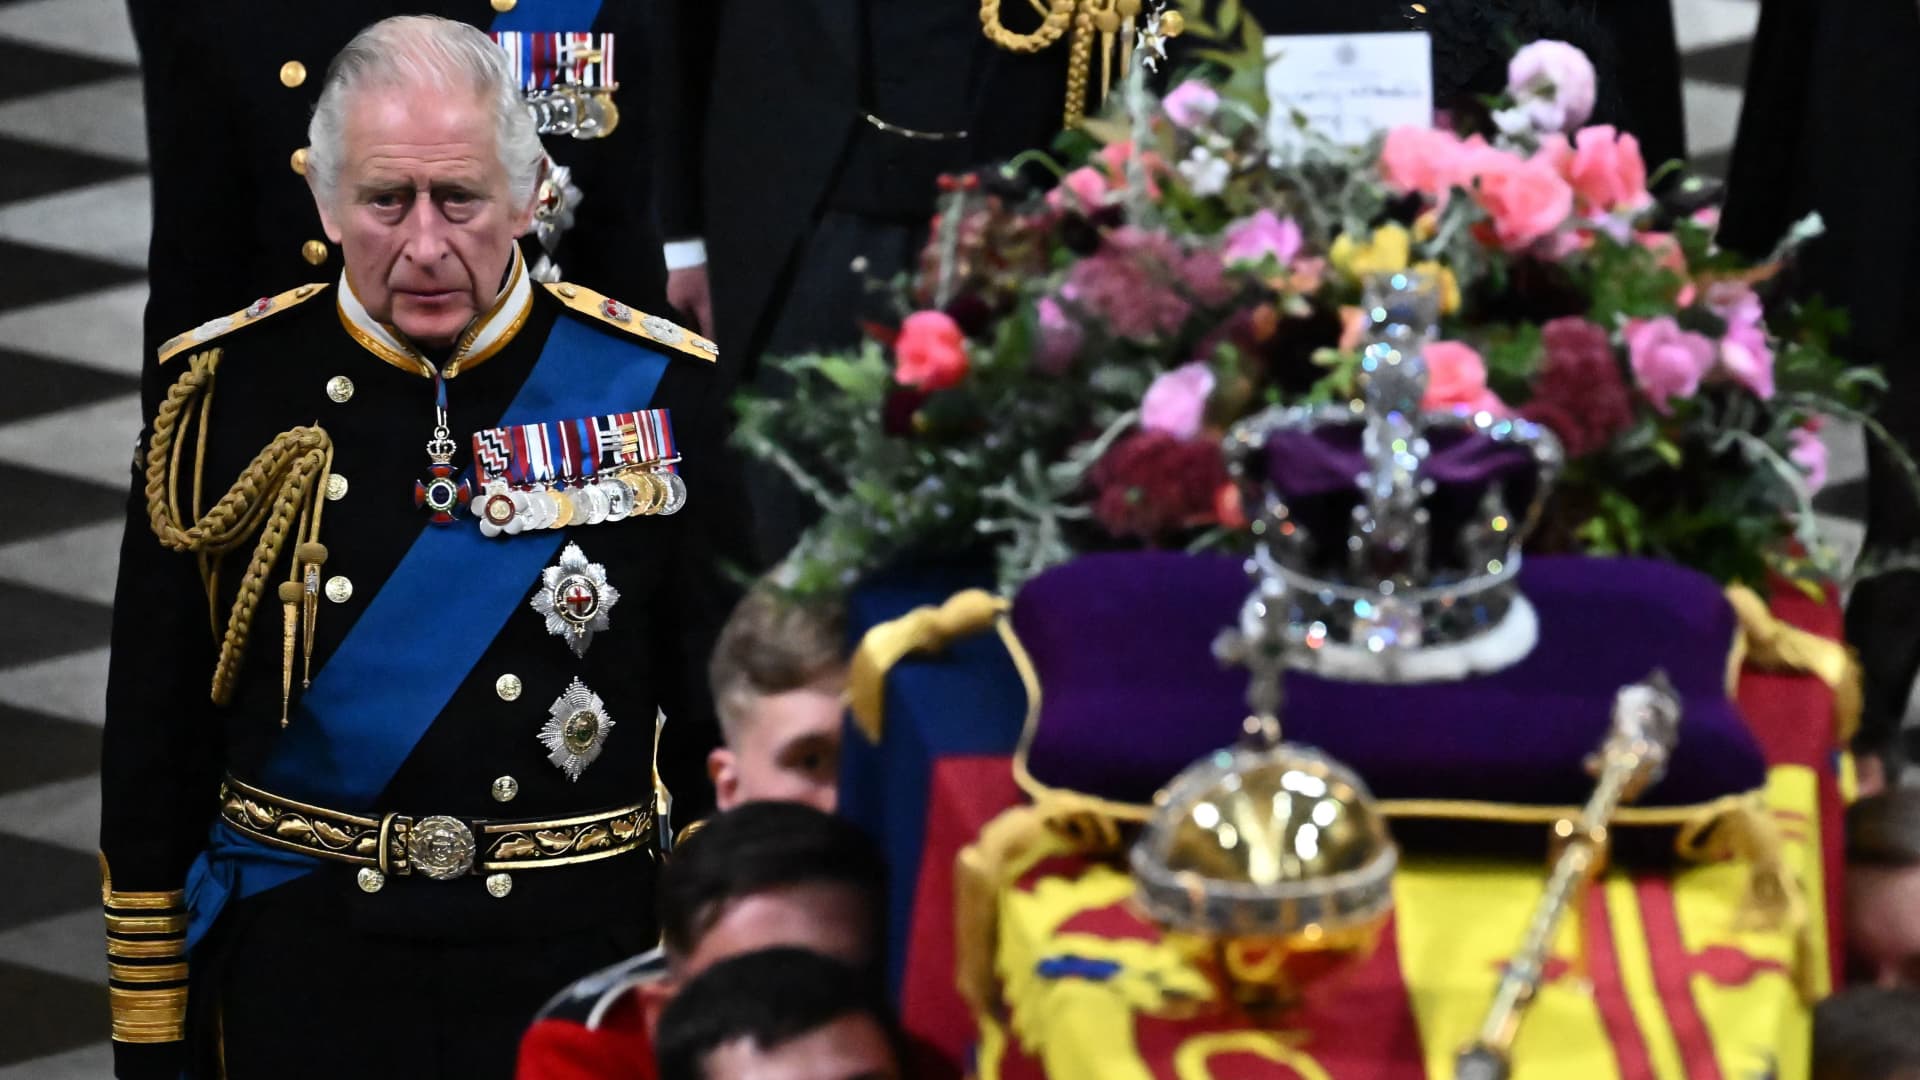 Britain's King Charles III (L) walks beside The coffin of Queen Elizabeth II, draped in a Royal Standard and adorned with the Imperial State Crown and the Sovereign's orb and sceptre as it leaves the Abbey at the State Funeral Service for Britain's Queen Elizabeth II, at Westminster Abbey in London on September 19, 2022.